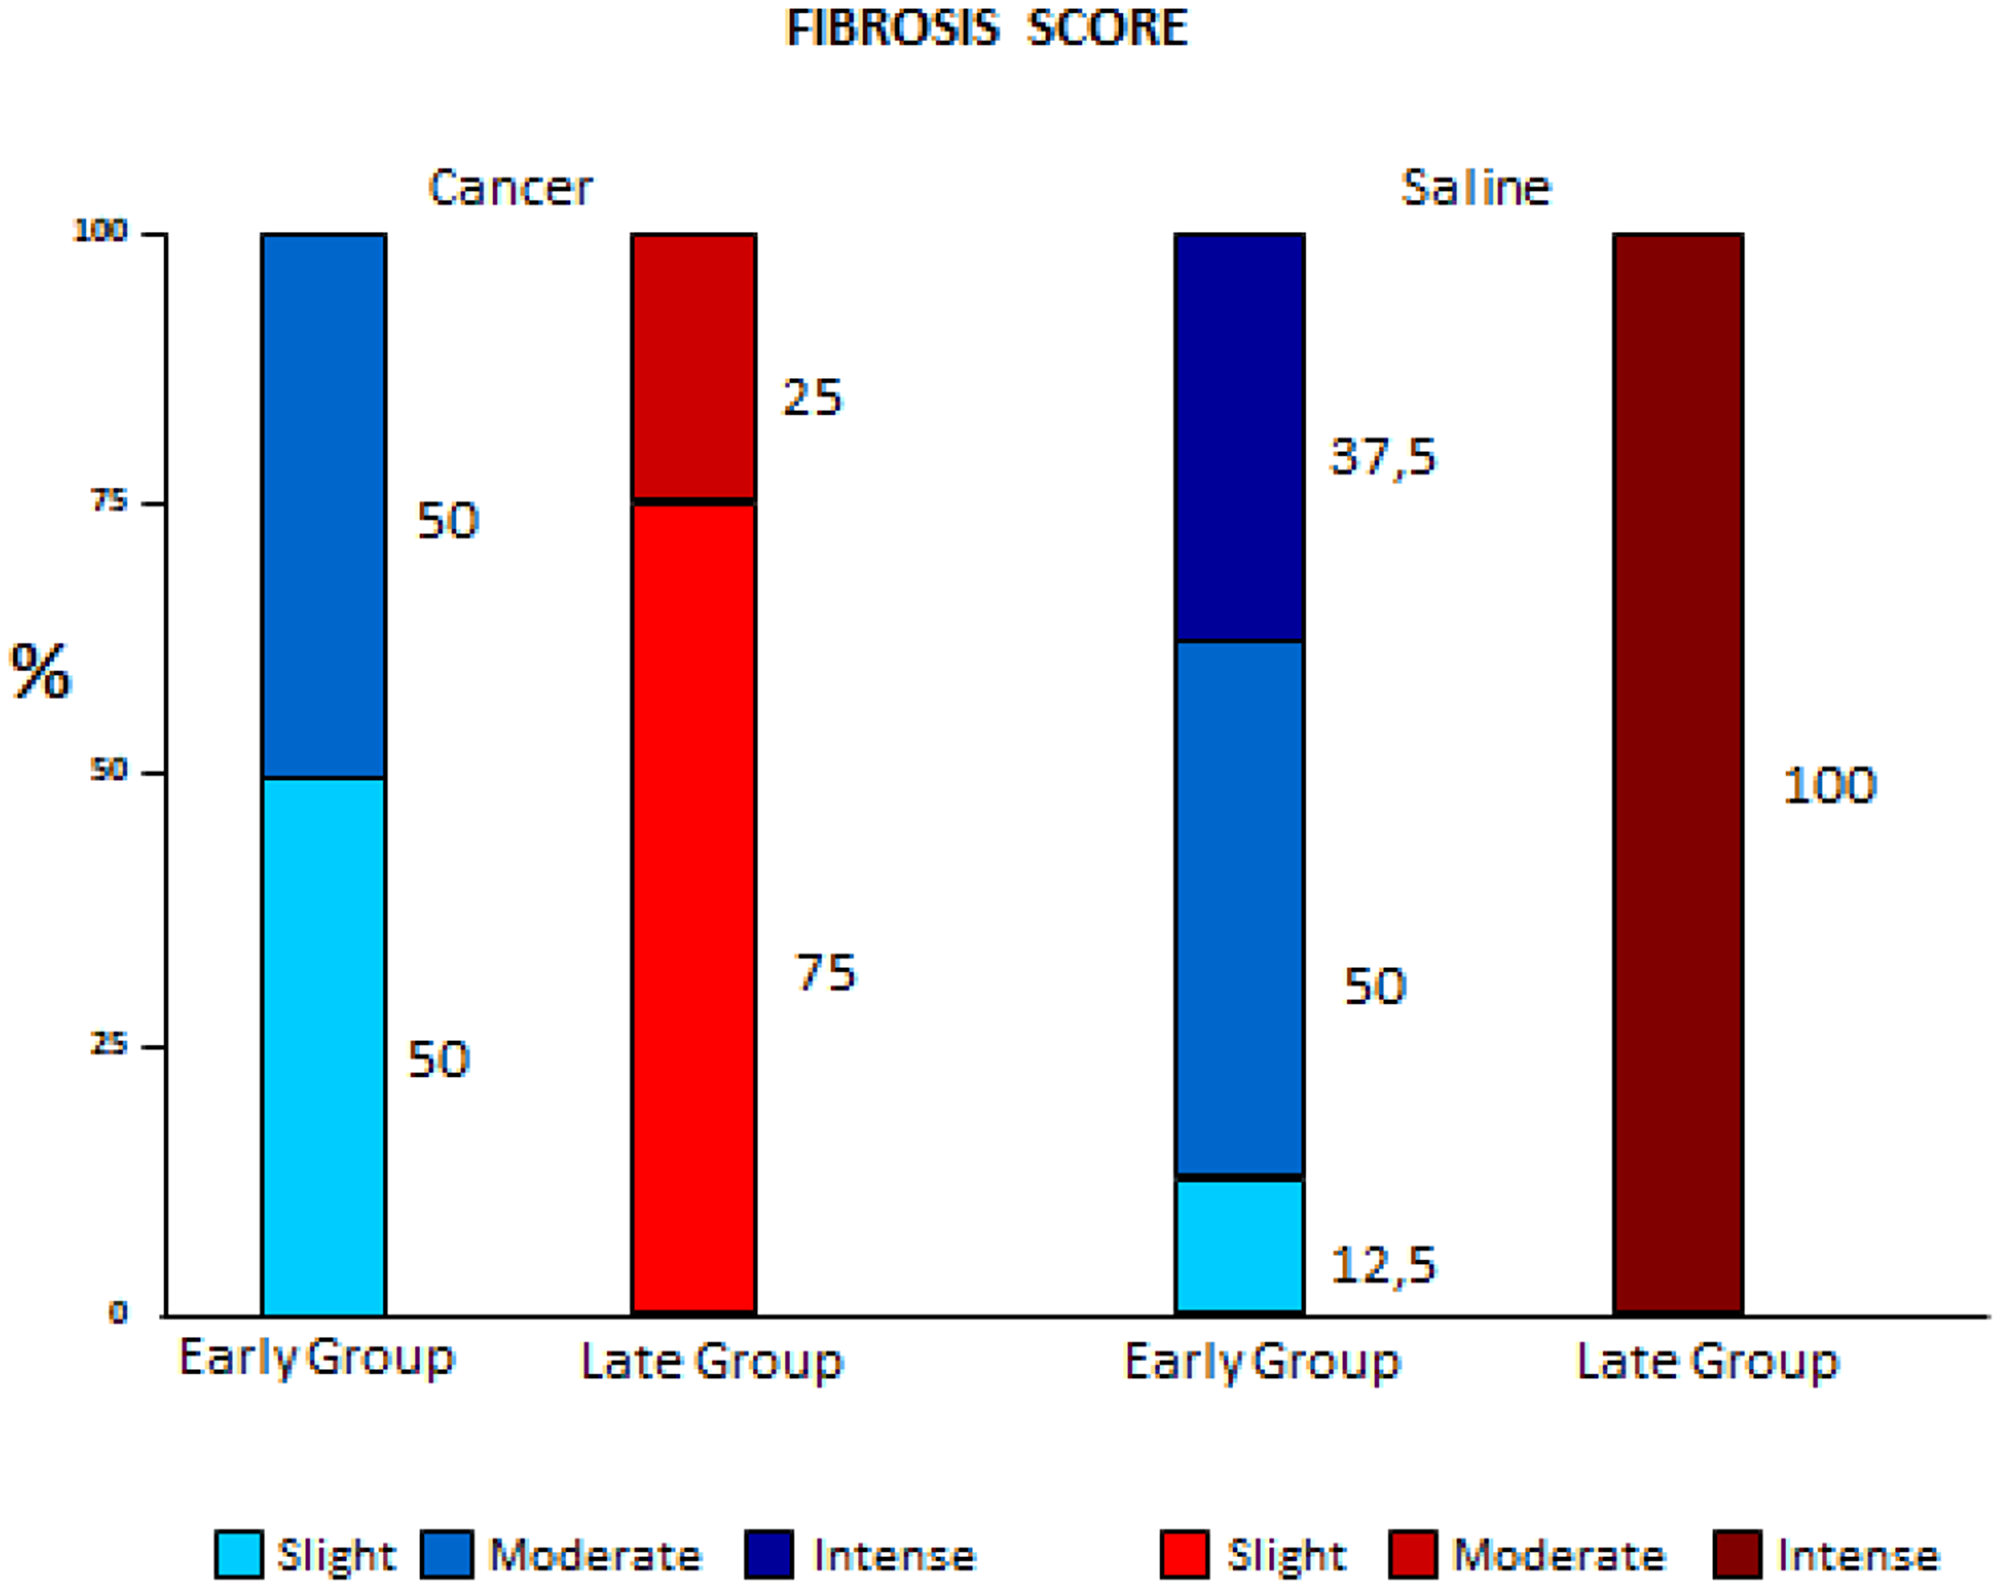 Figure 1: Comparison of fibrosis variation between early and late pleurodesis and between cancer and saline groups.